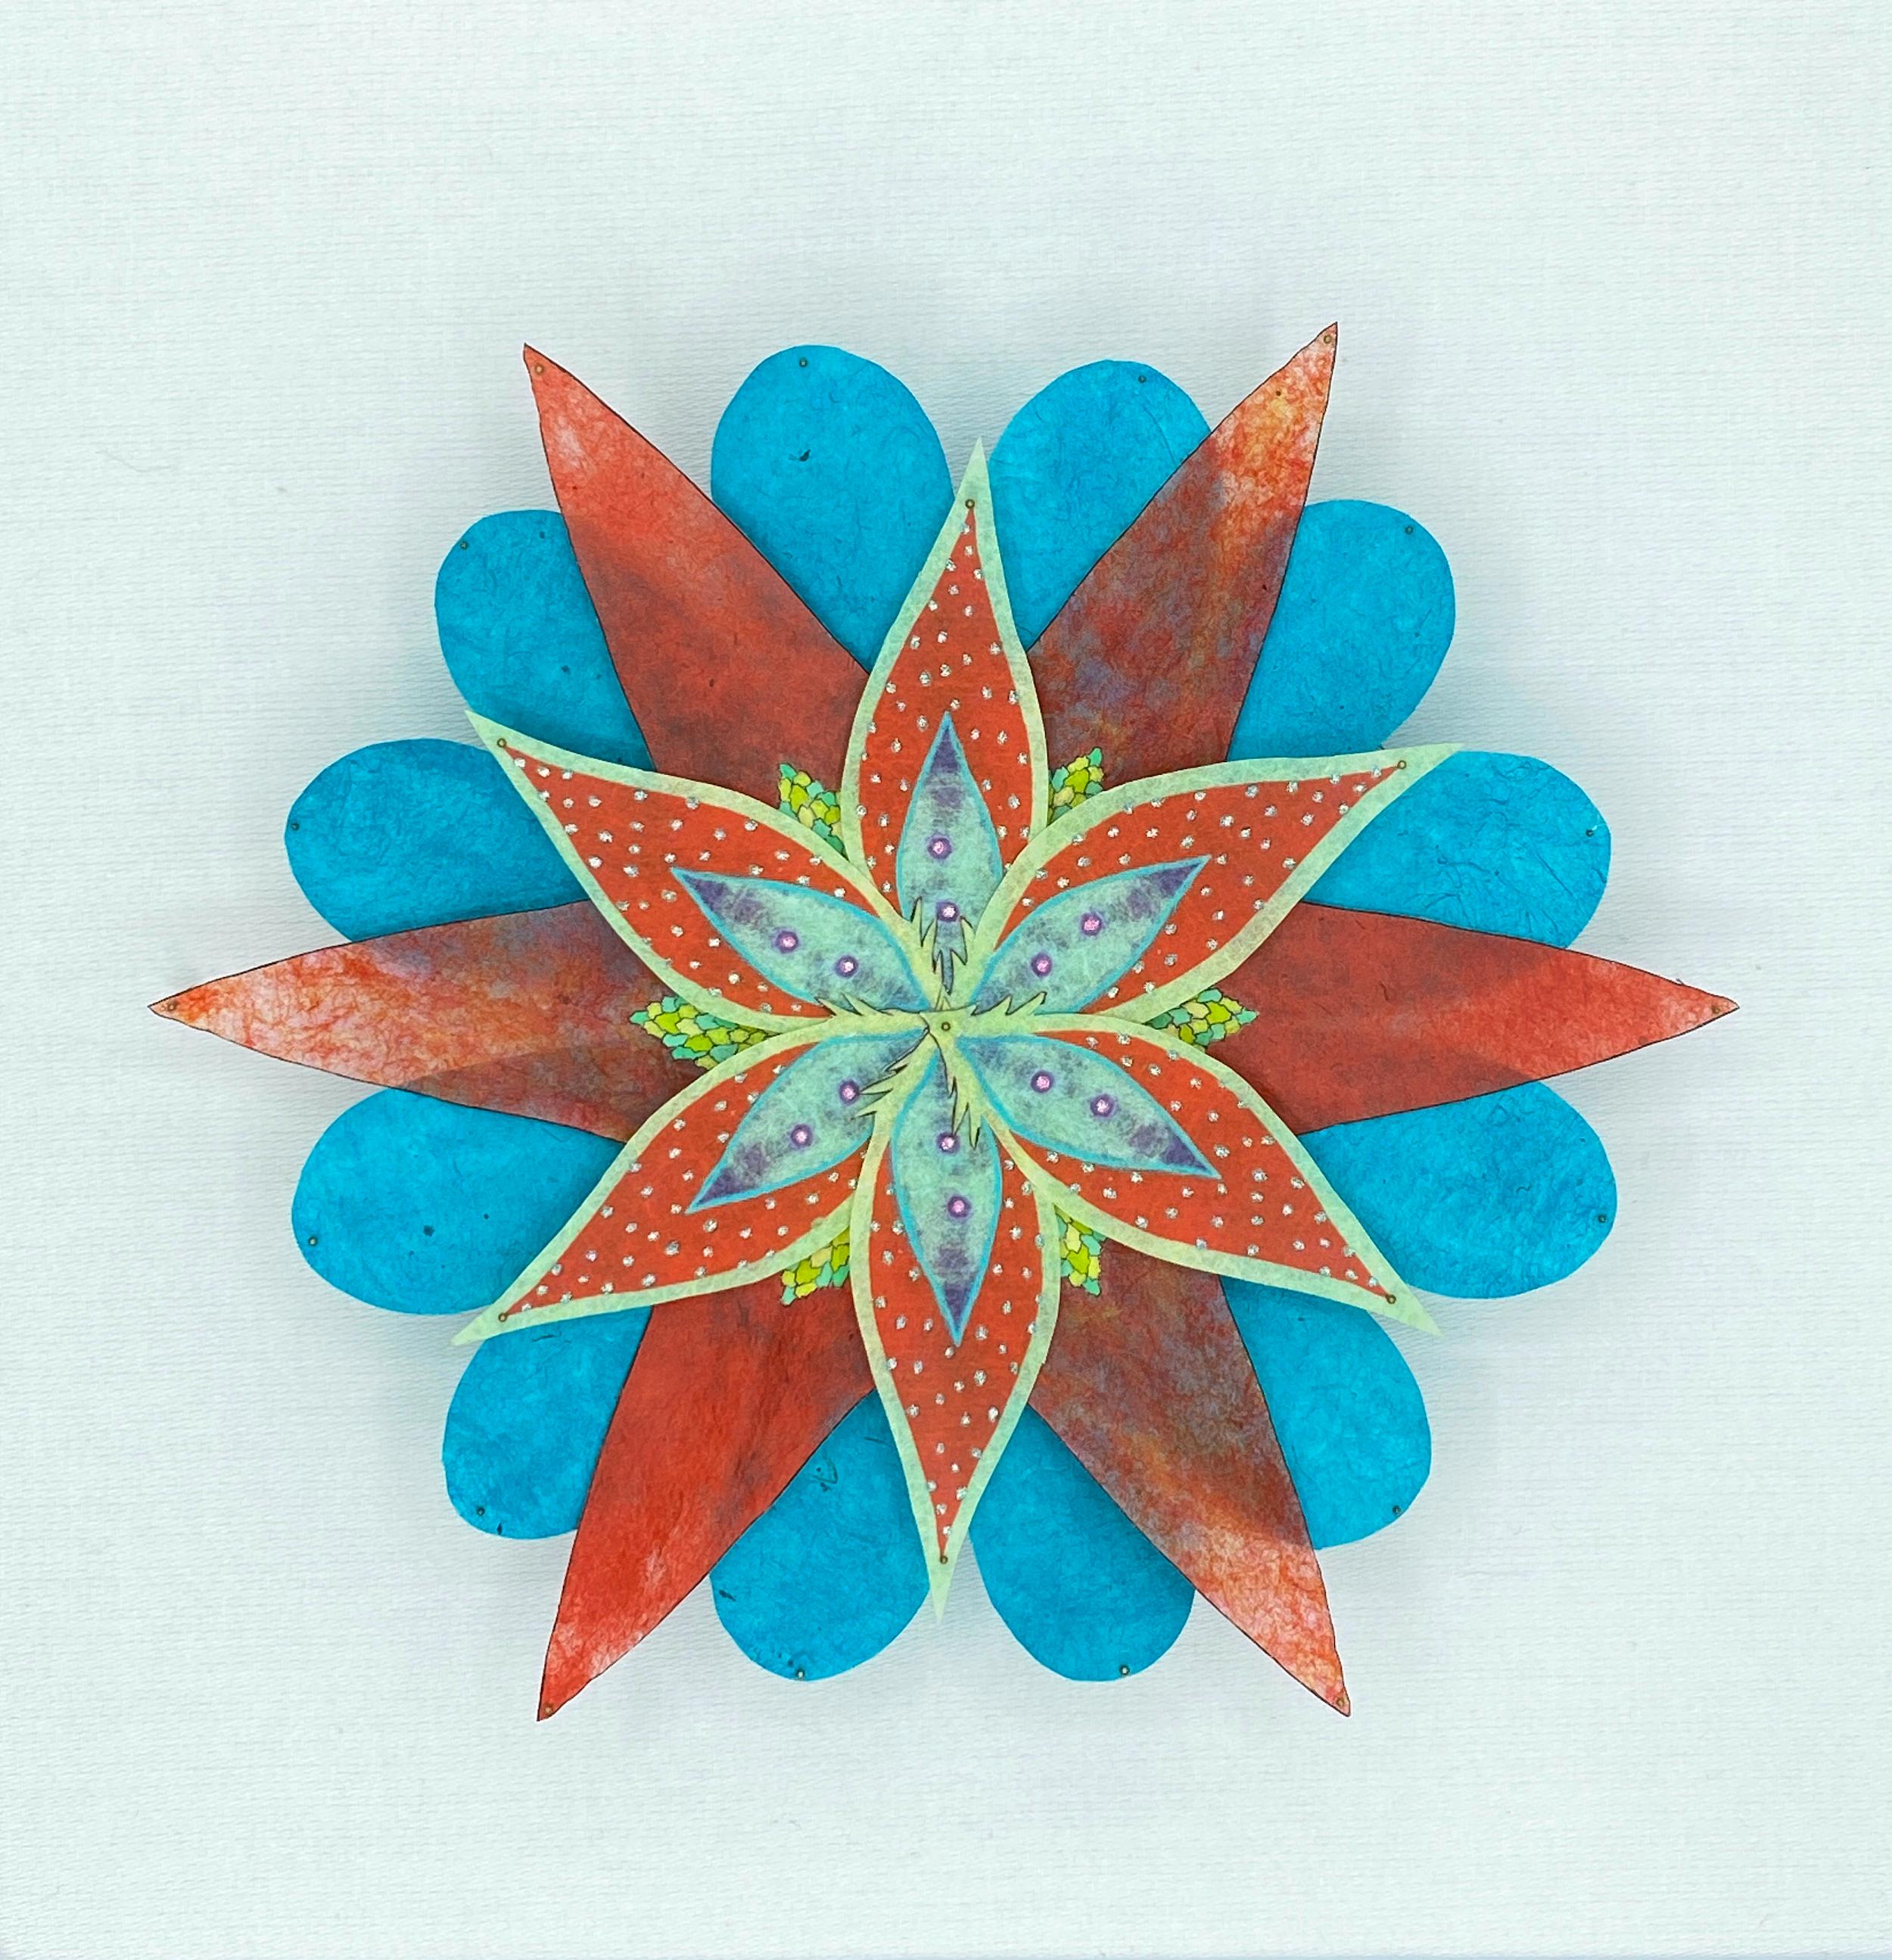 Fanfare Star, Teal Blue, Red Colorful Botanical Paper Flower Wall Sculpture